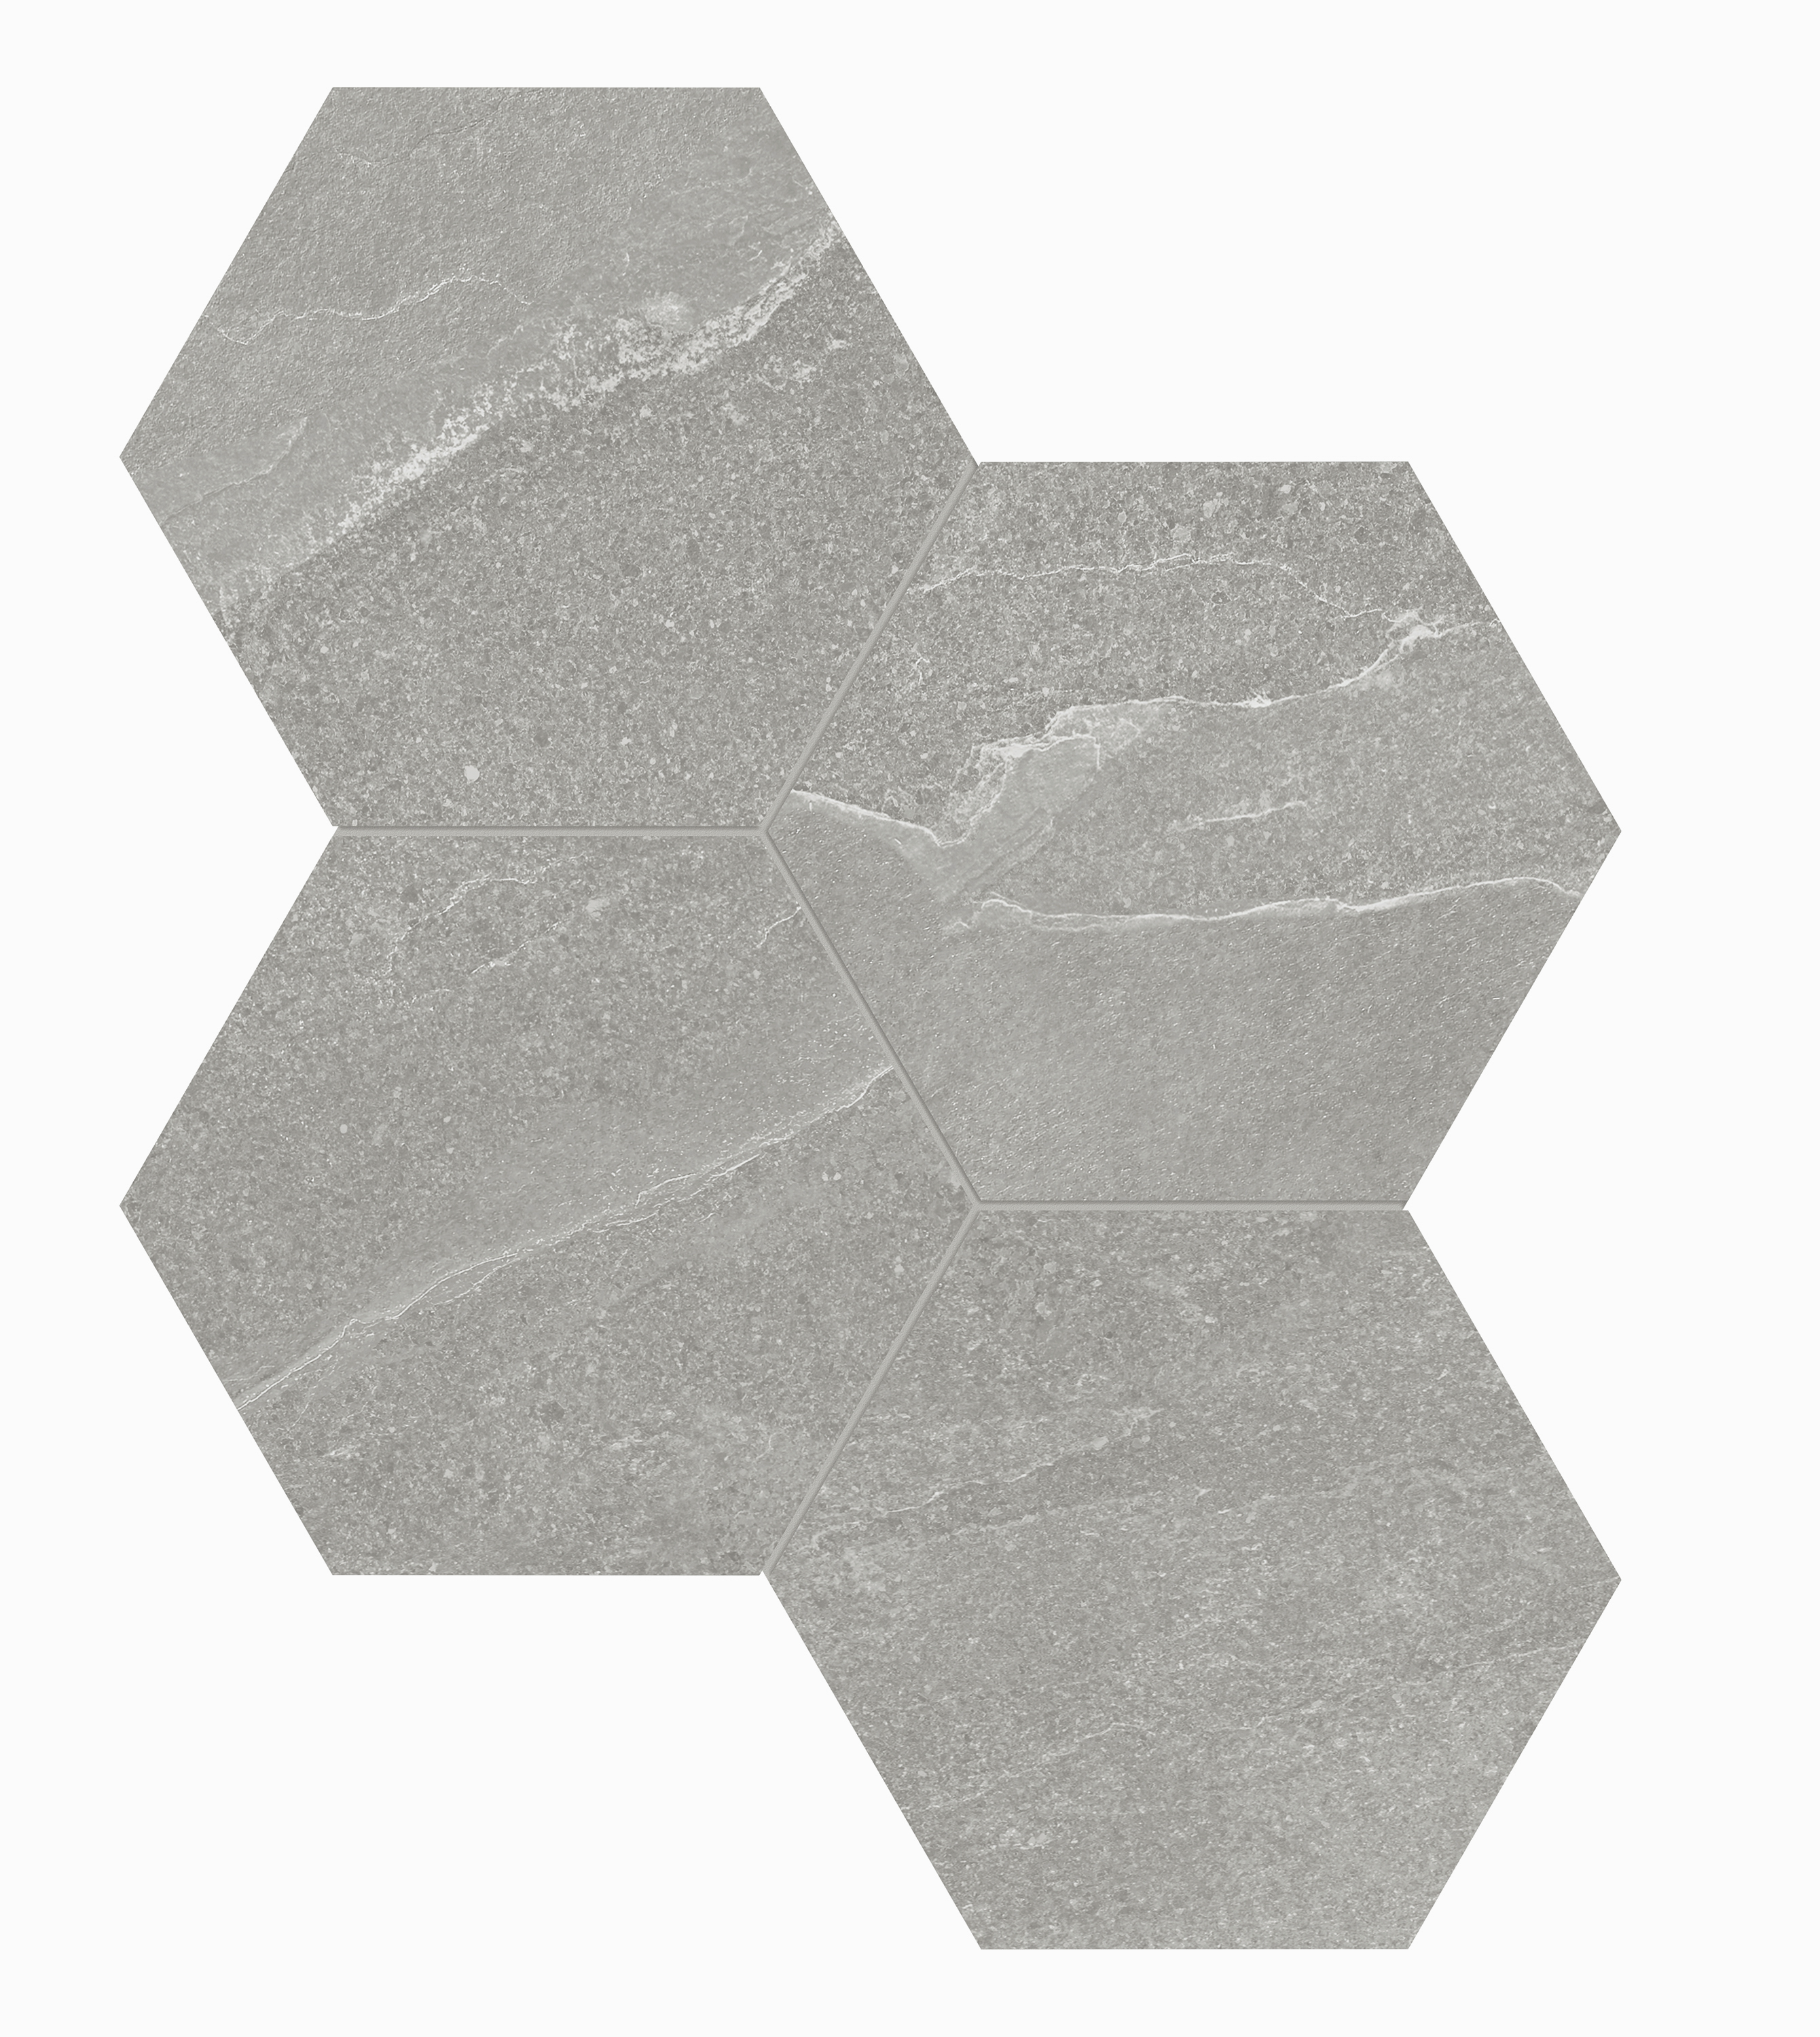 palladium hexagon 6-inch pattern color body porcelain mosaic from nord anatolia collection distributed by surface group international matte finish straight edge edge mesh shape